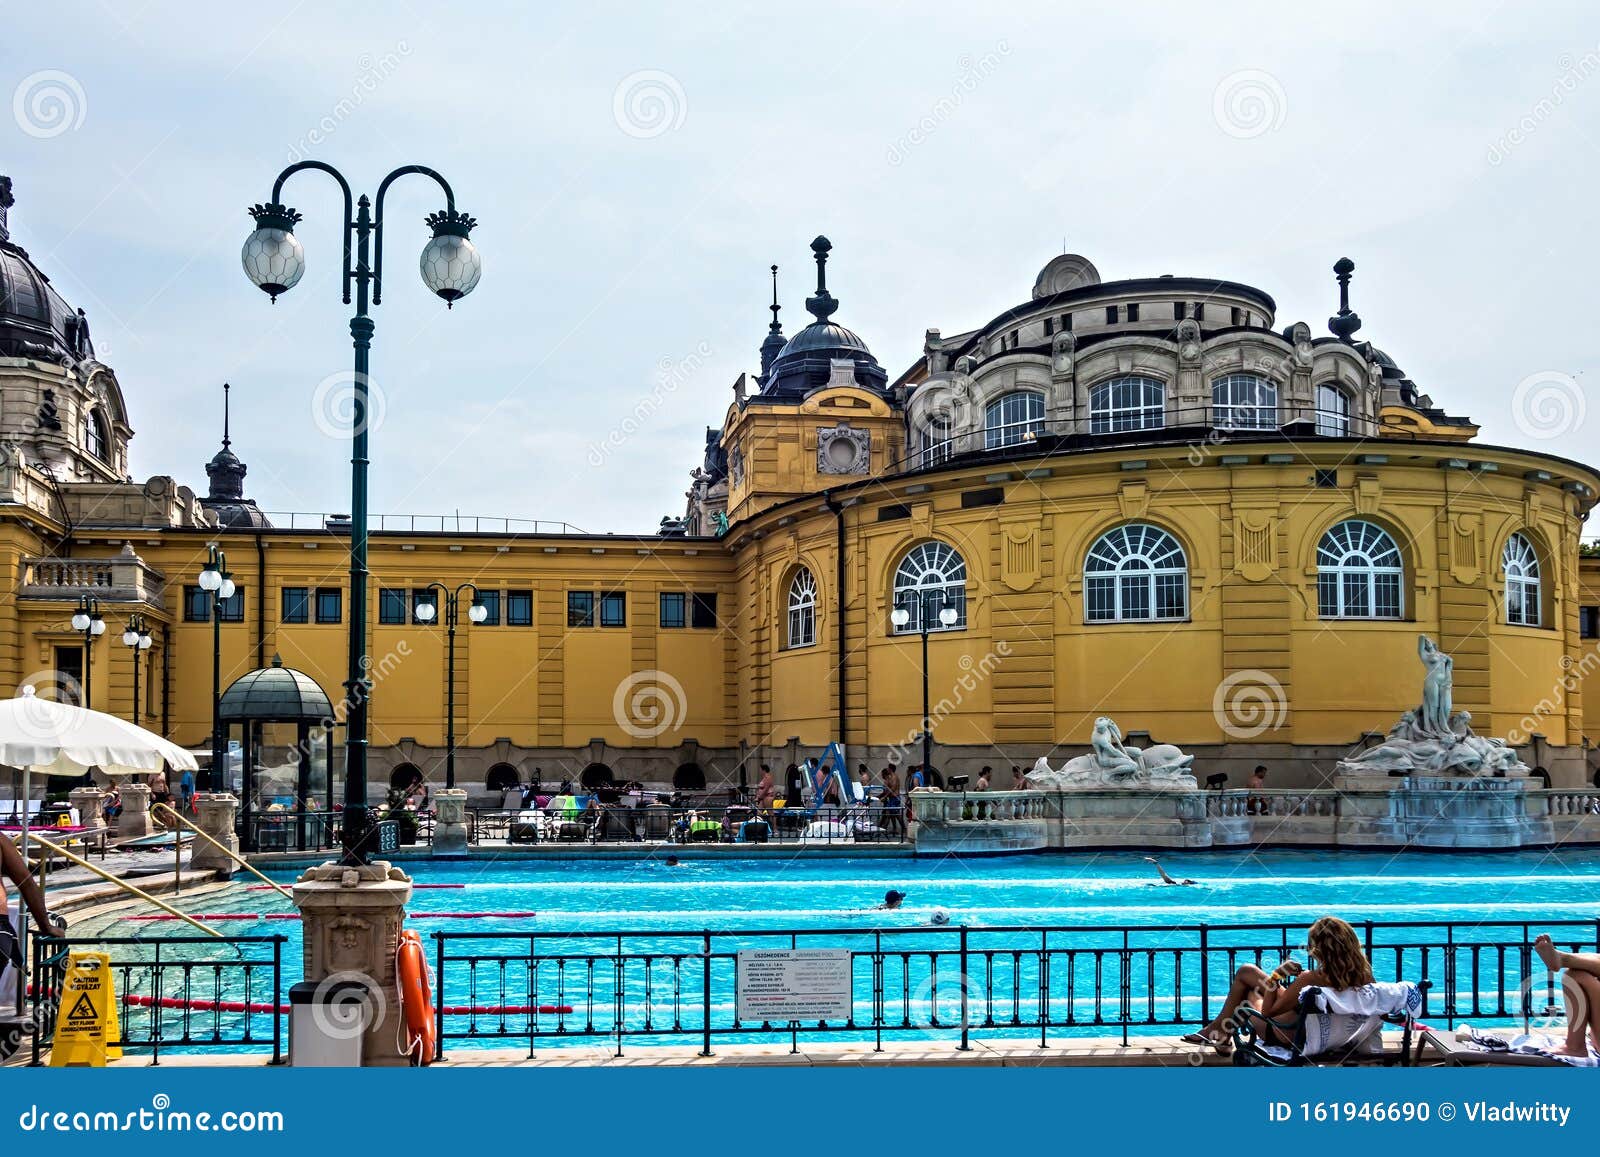 Szechenyi Baths And Pool Budapest Hungary Europe August 24 2019 Editorial Image Image Of Outdoor Hungarian 161946690